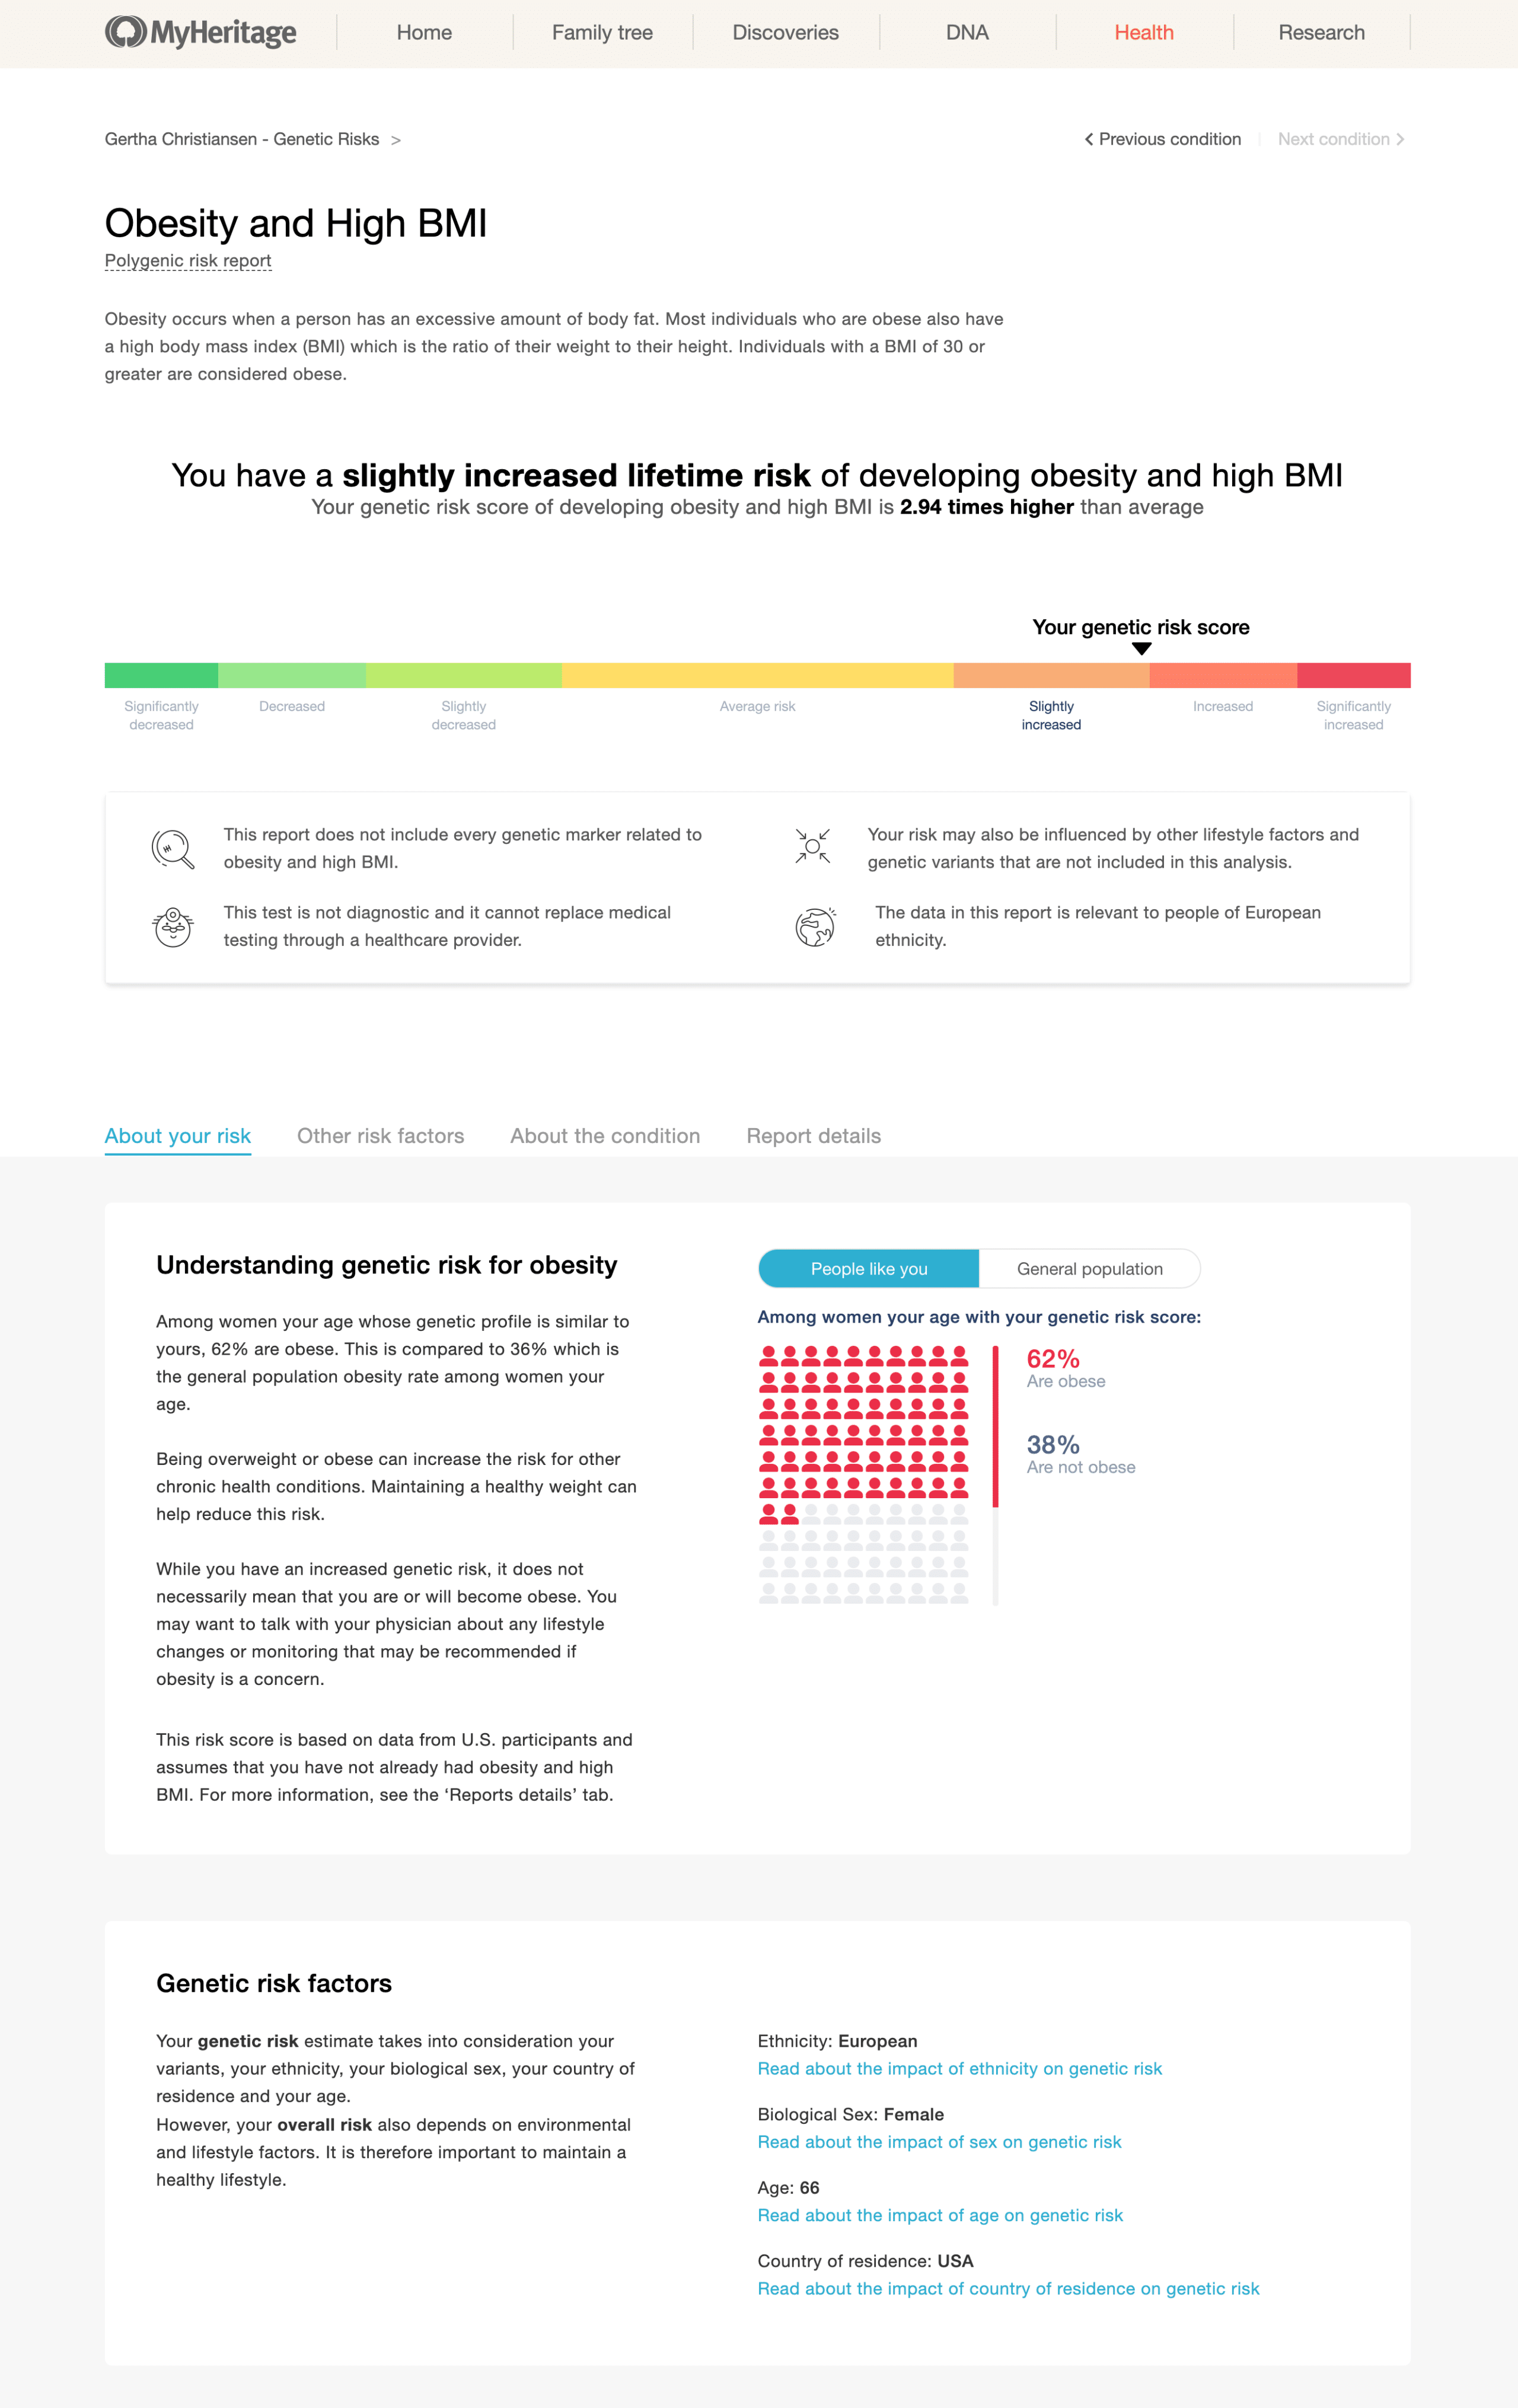 New: Obesity and High BMI report (click to zoom)